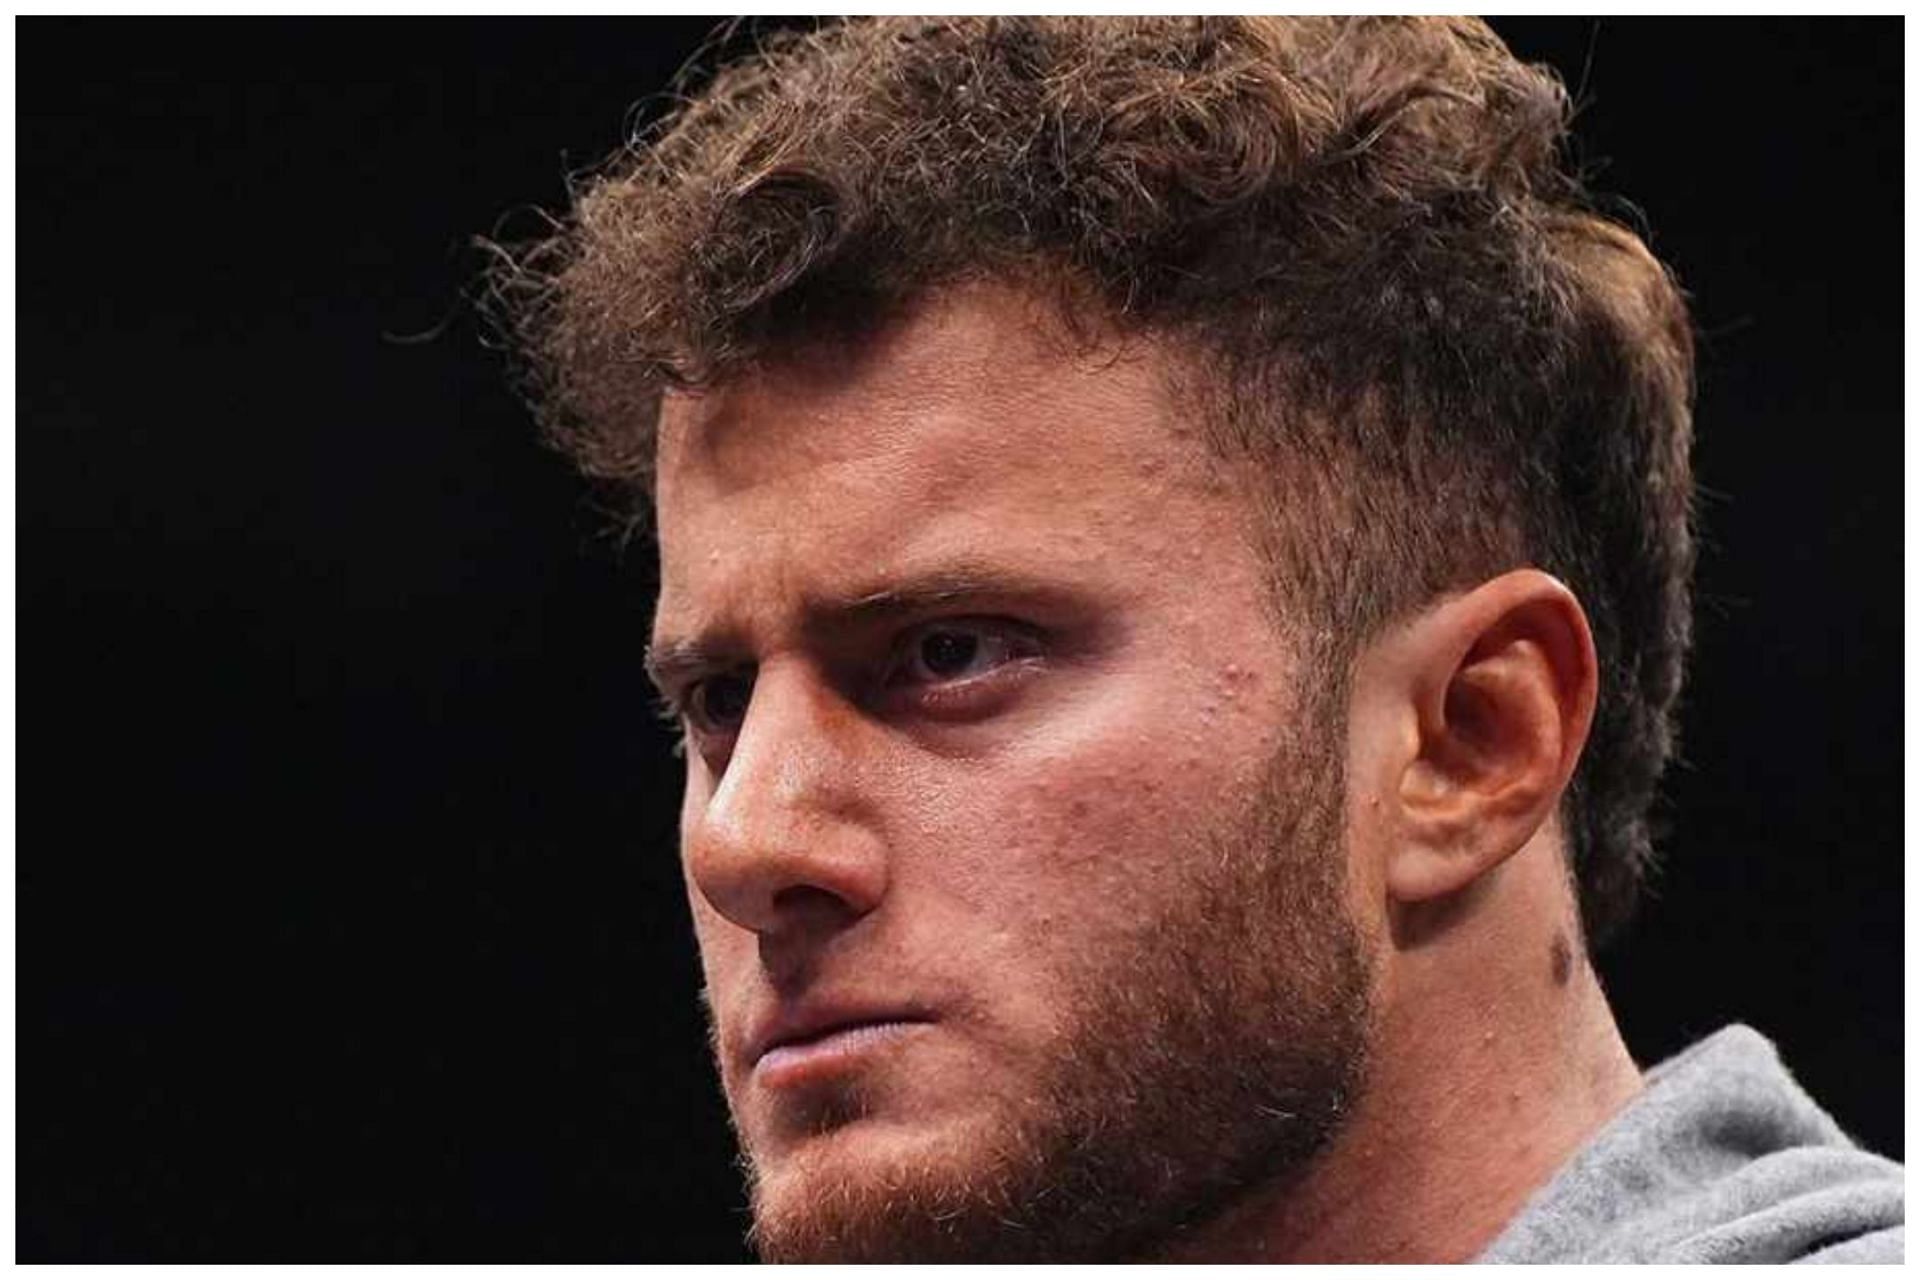 Former AEW World Champion MJF is currently out with injury 